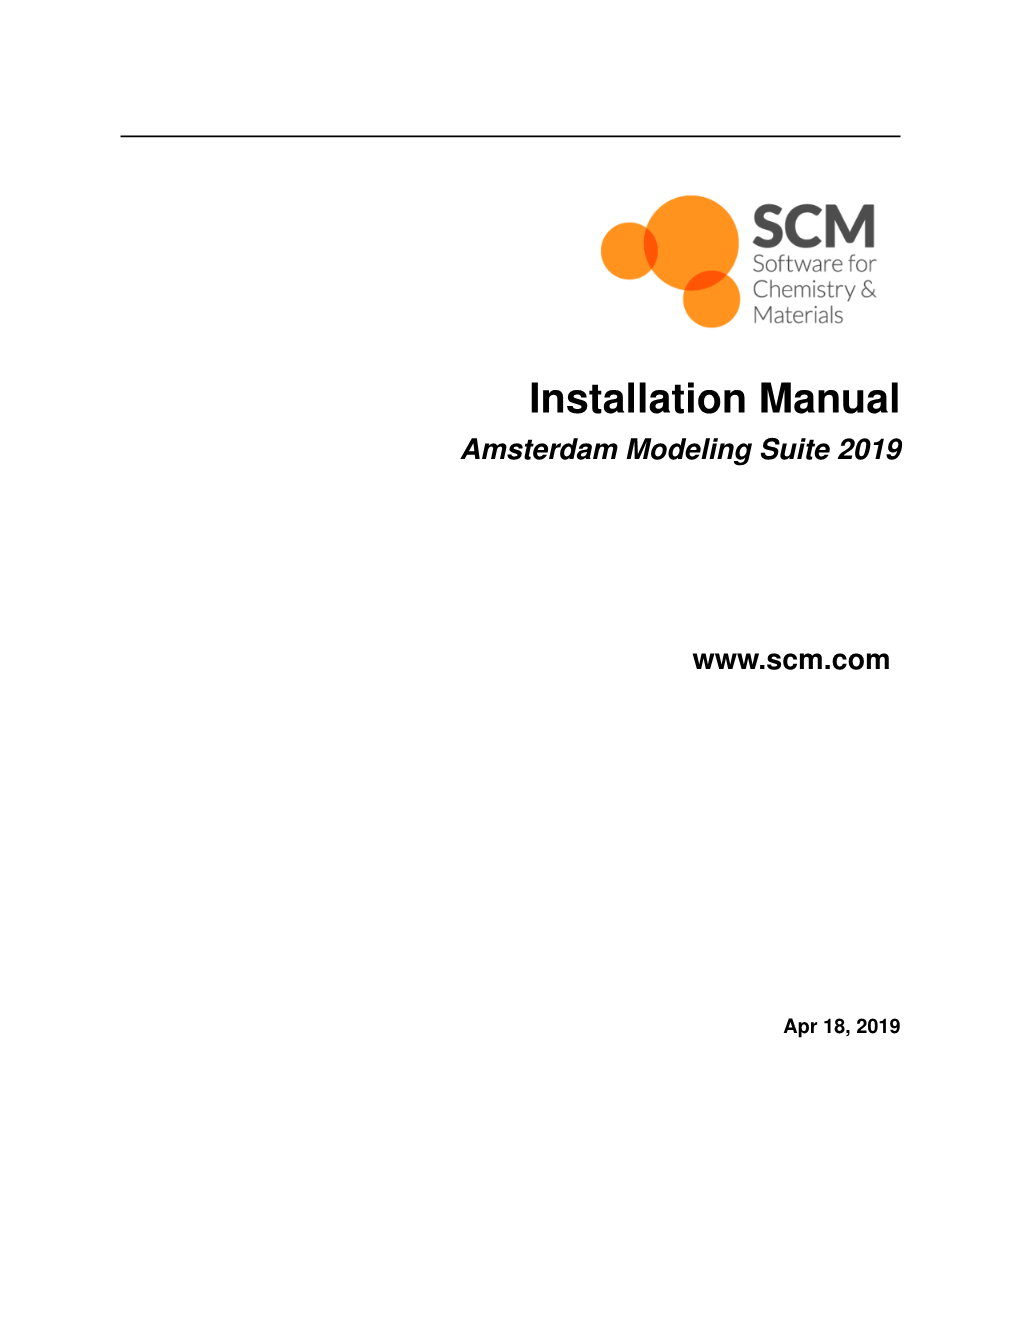 Installation Manual Amsterdam Modeling Suite 2019